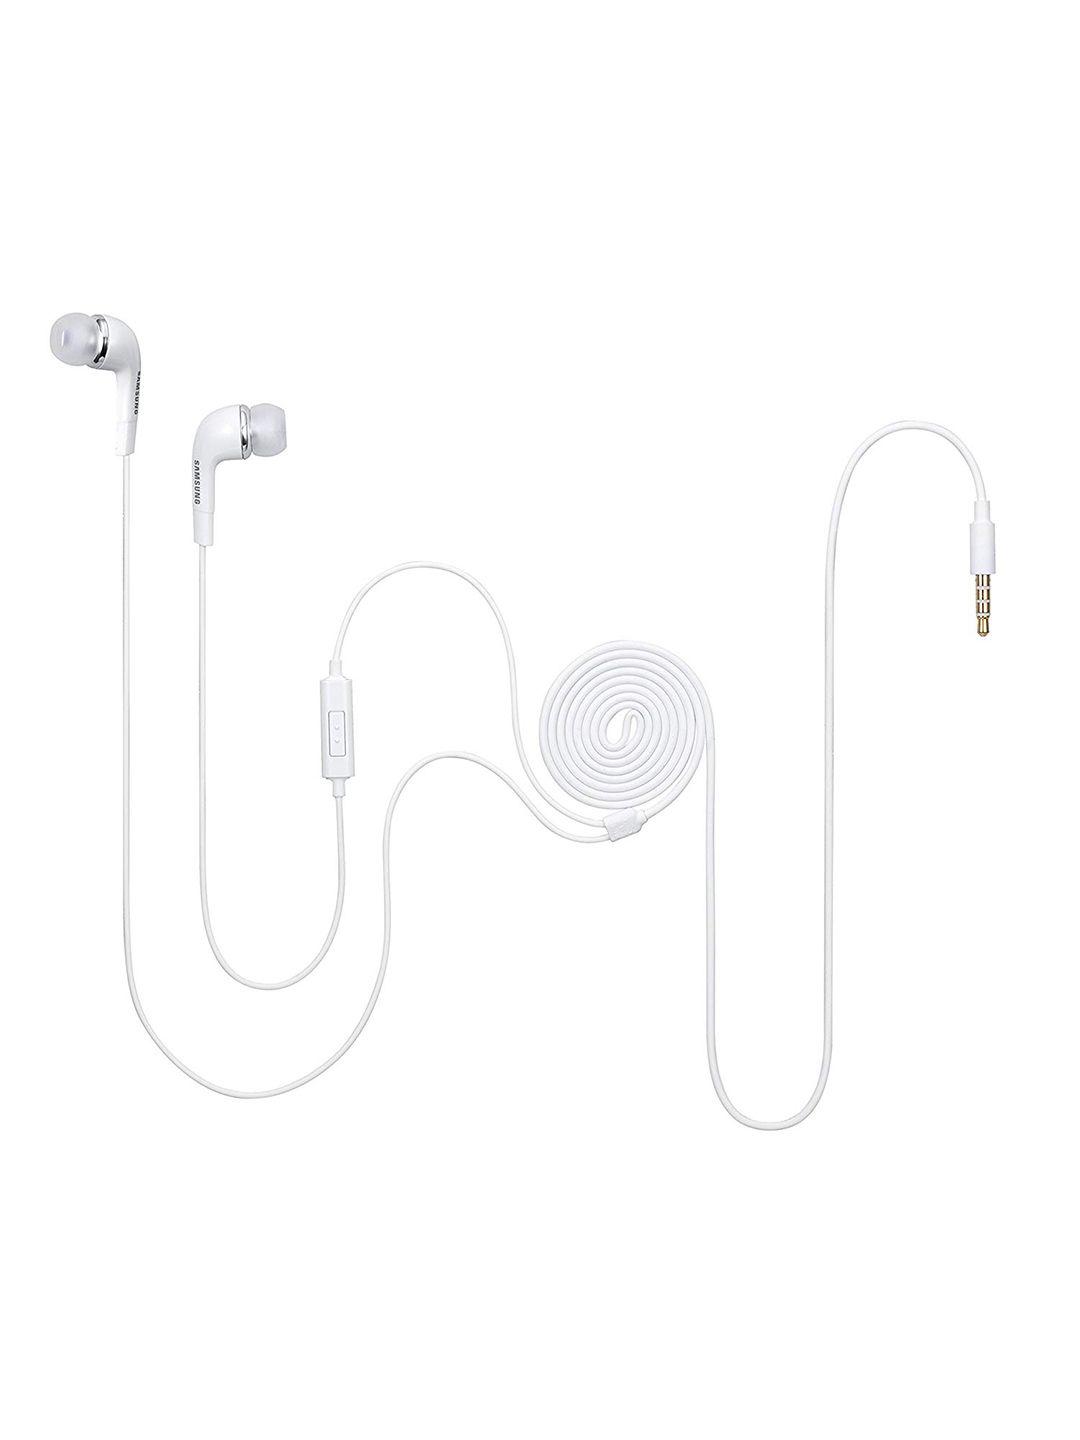 Samsung EHS64AVFWECINU White Wired In -Ear Headset with Mic